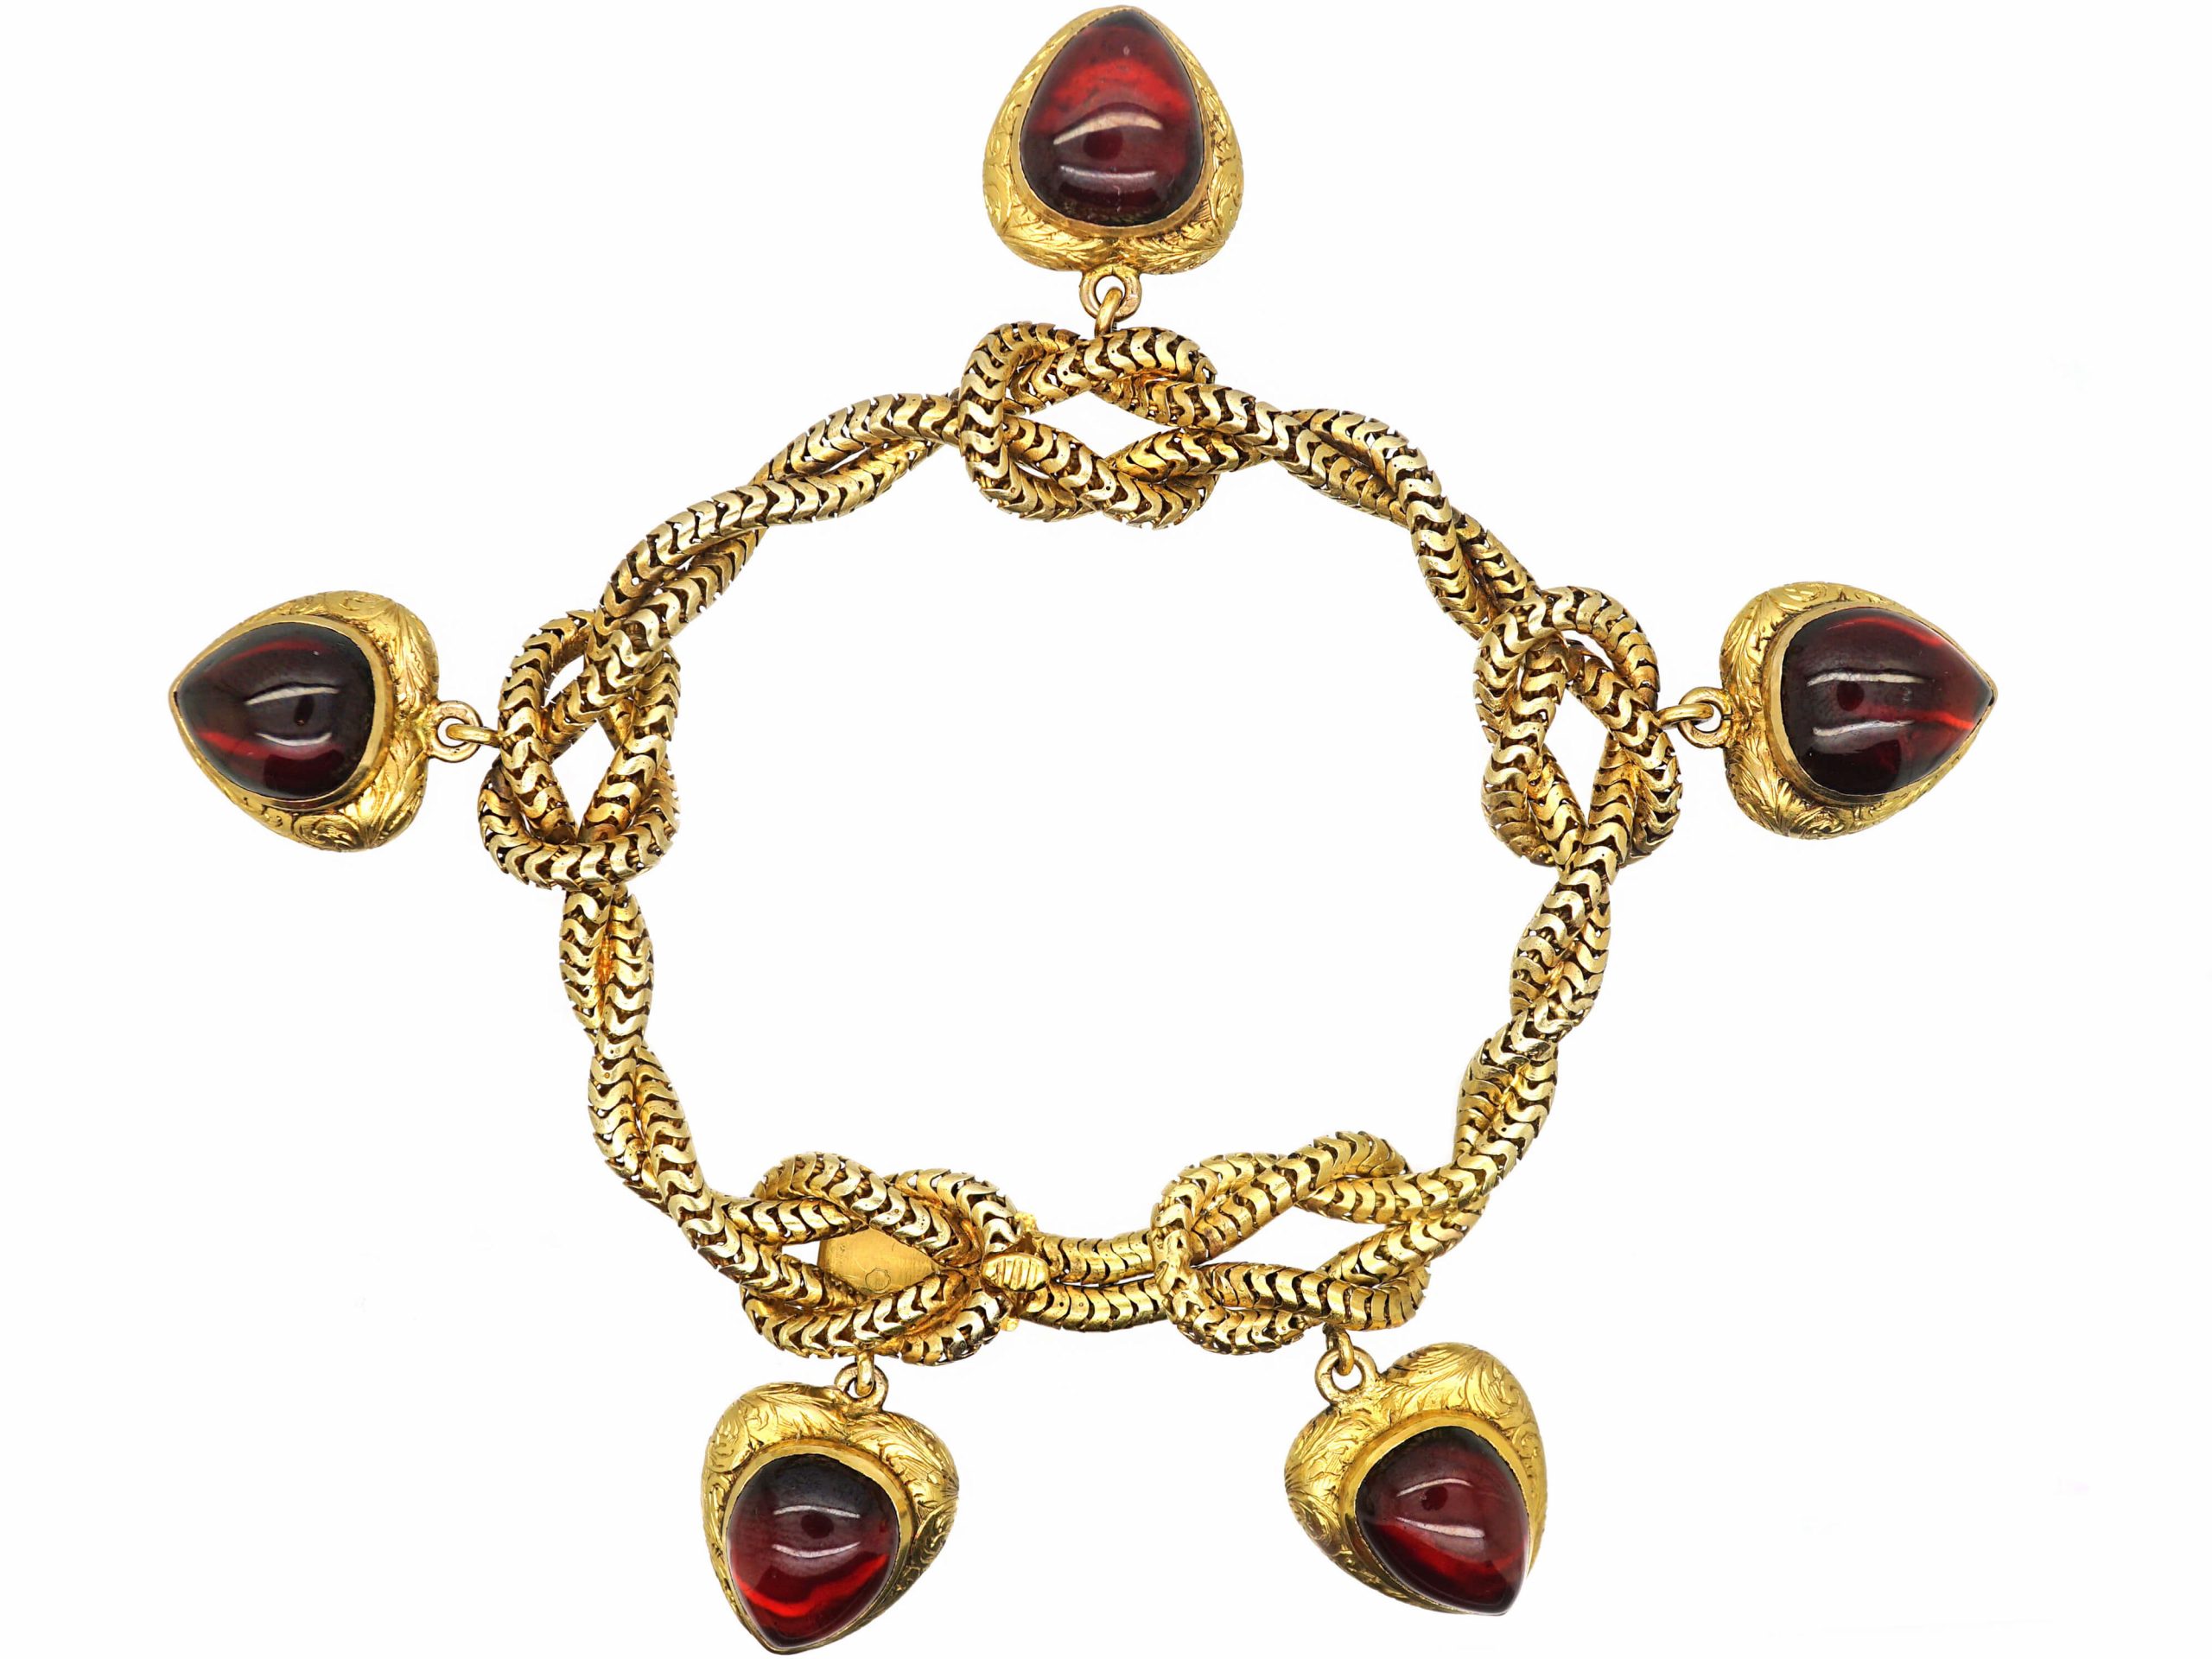 Early Victorian 18ct Gold Lover's Knot Bracelet with Five Hearts